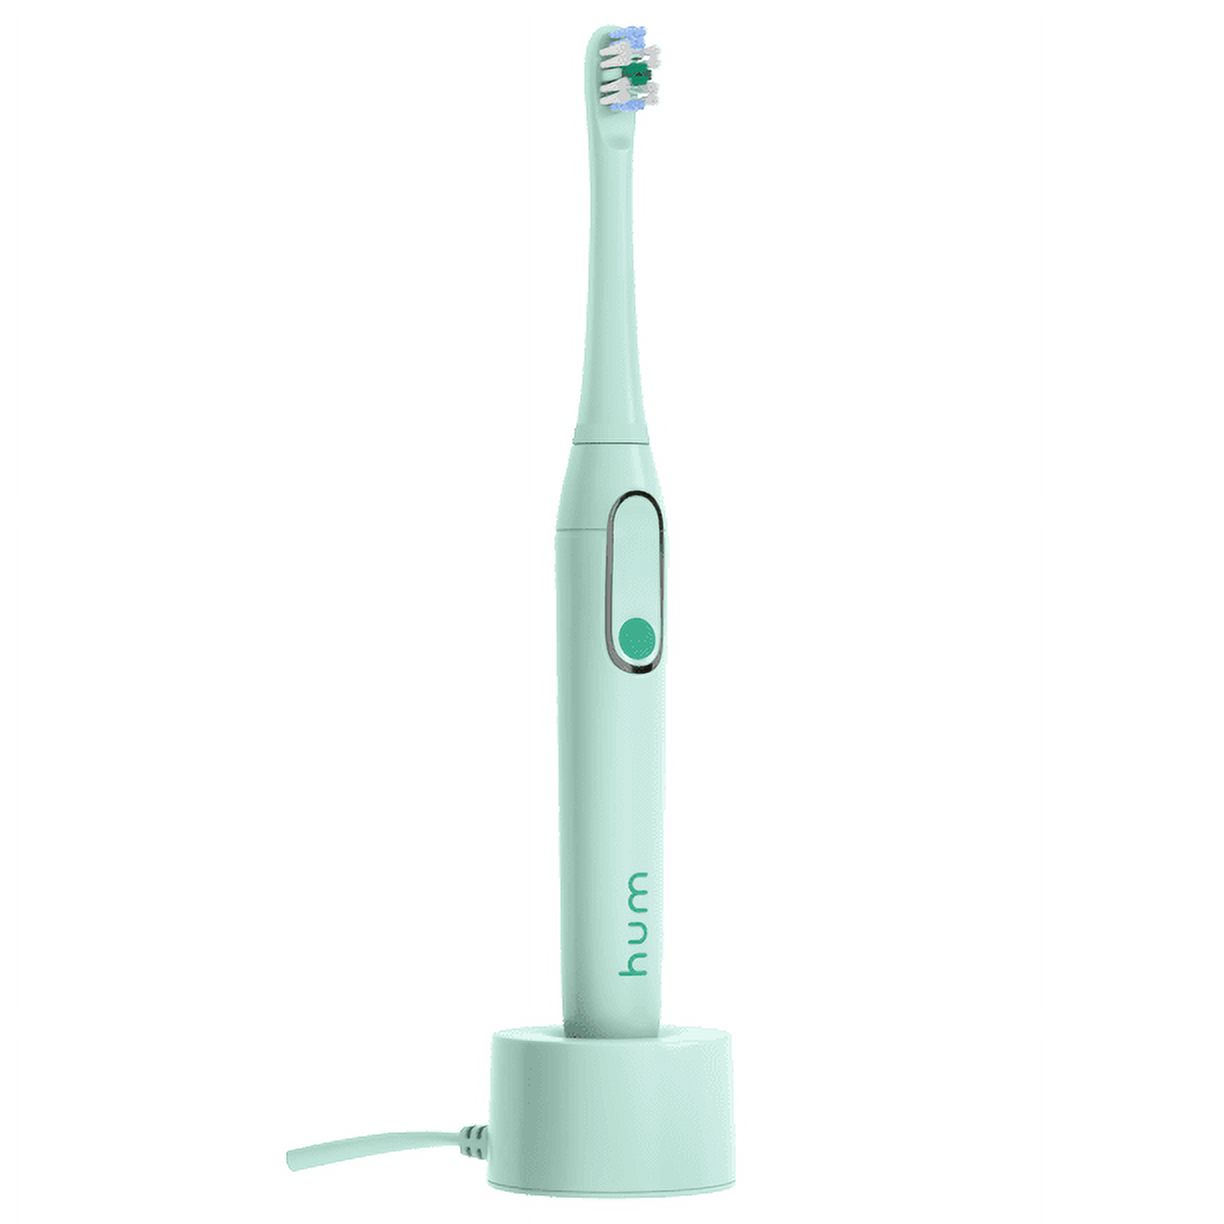 hum by Colgate Smart Electric Toothbrush, Rechargeable Sonic Toothbrush with Travel Case, Teal - image 3 of 11